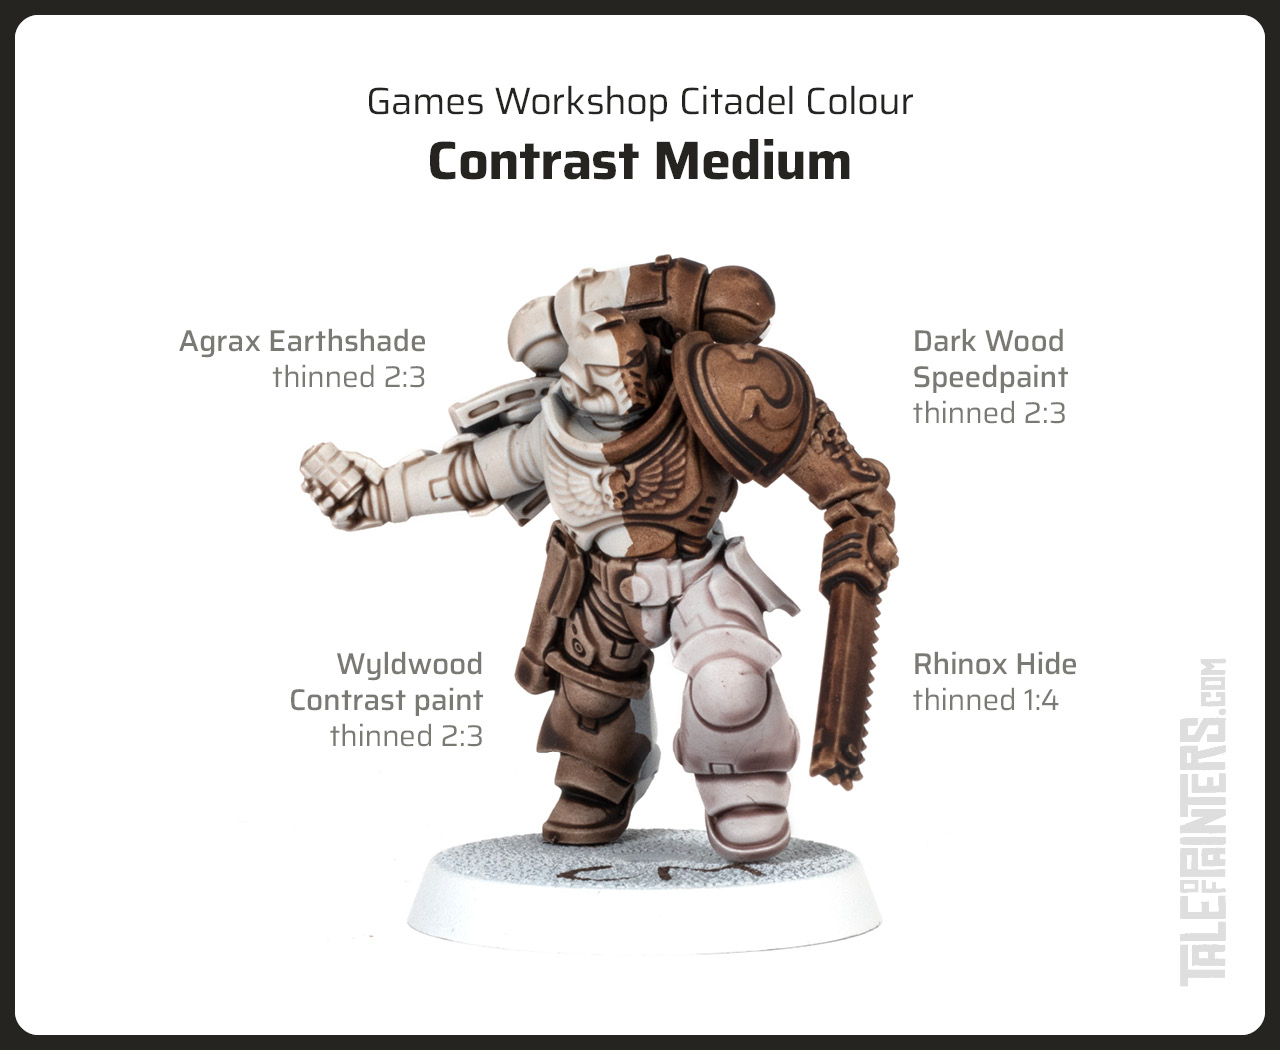 Best Medium for thining GW Washes - + GENERAL PCA QUESTIONS +